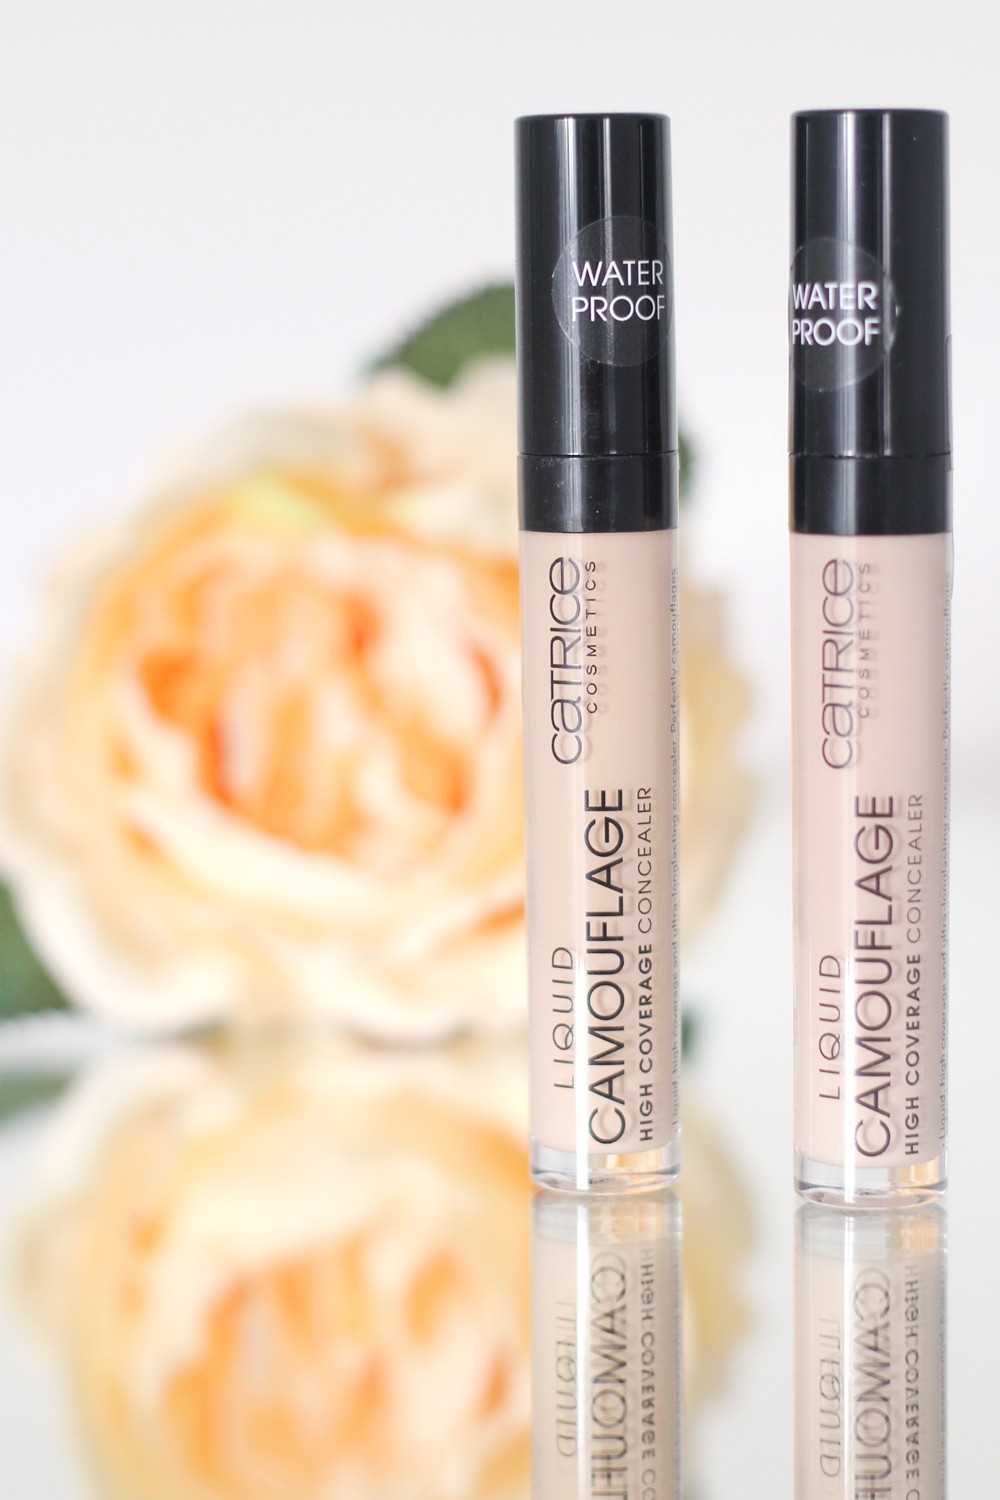 Catrice Liquid Camouflage Concealer Review